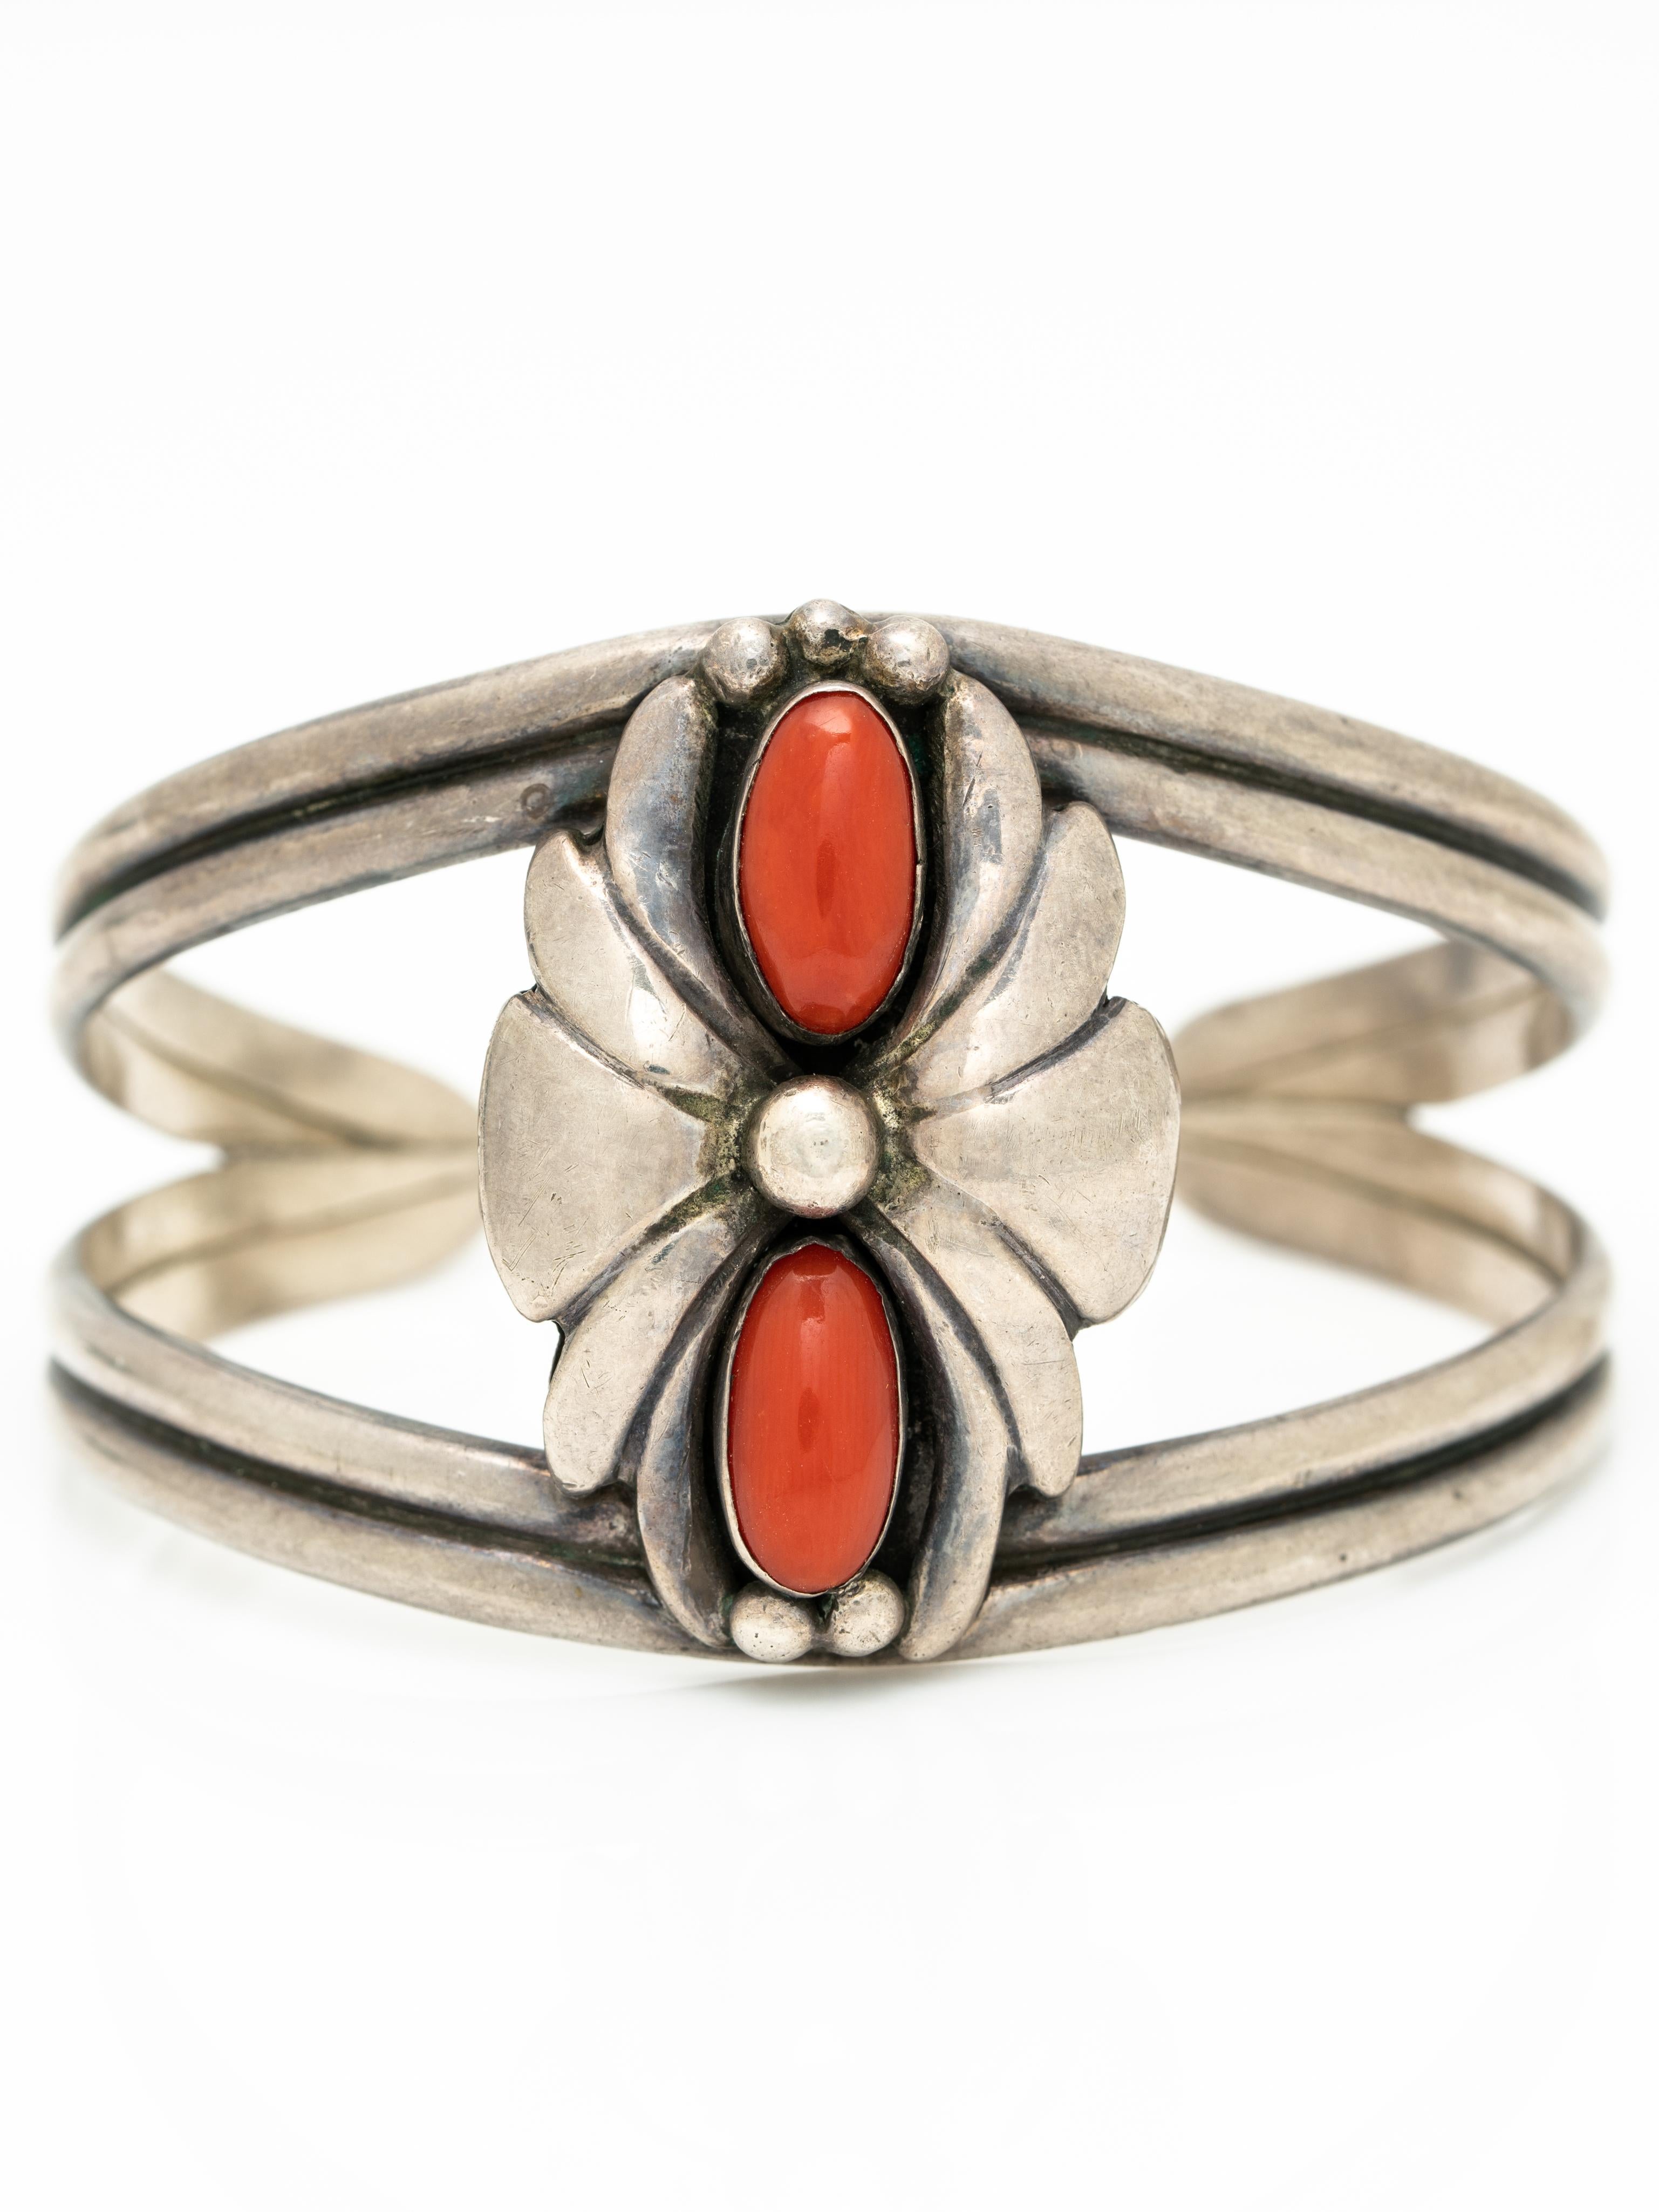 Vintage Native American Sterling Silver and Coral Navajo Cuff c. 1970s

The patina of the silver is oxidized, we do not clean vintage and antique silver pieces as some clients prefer these vintage treasures in their natural oxidized form but we are